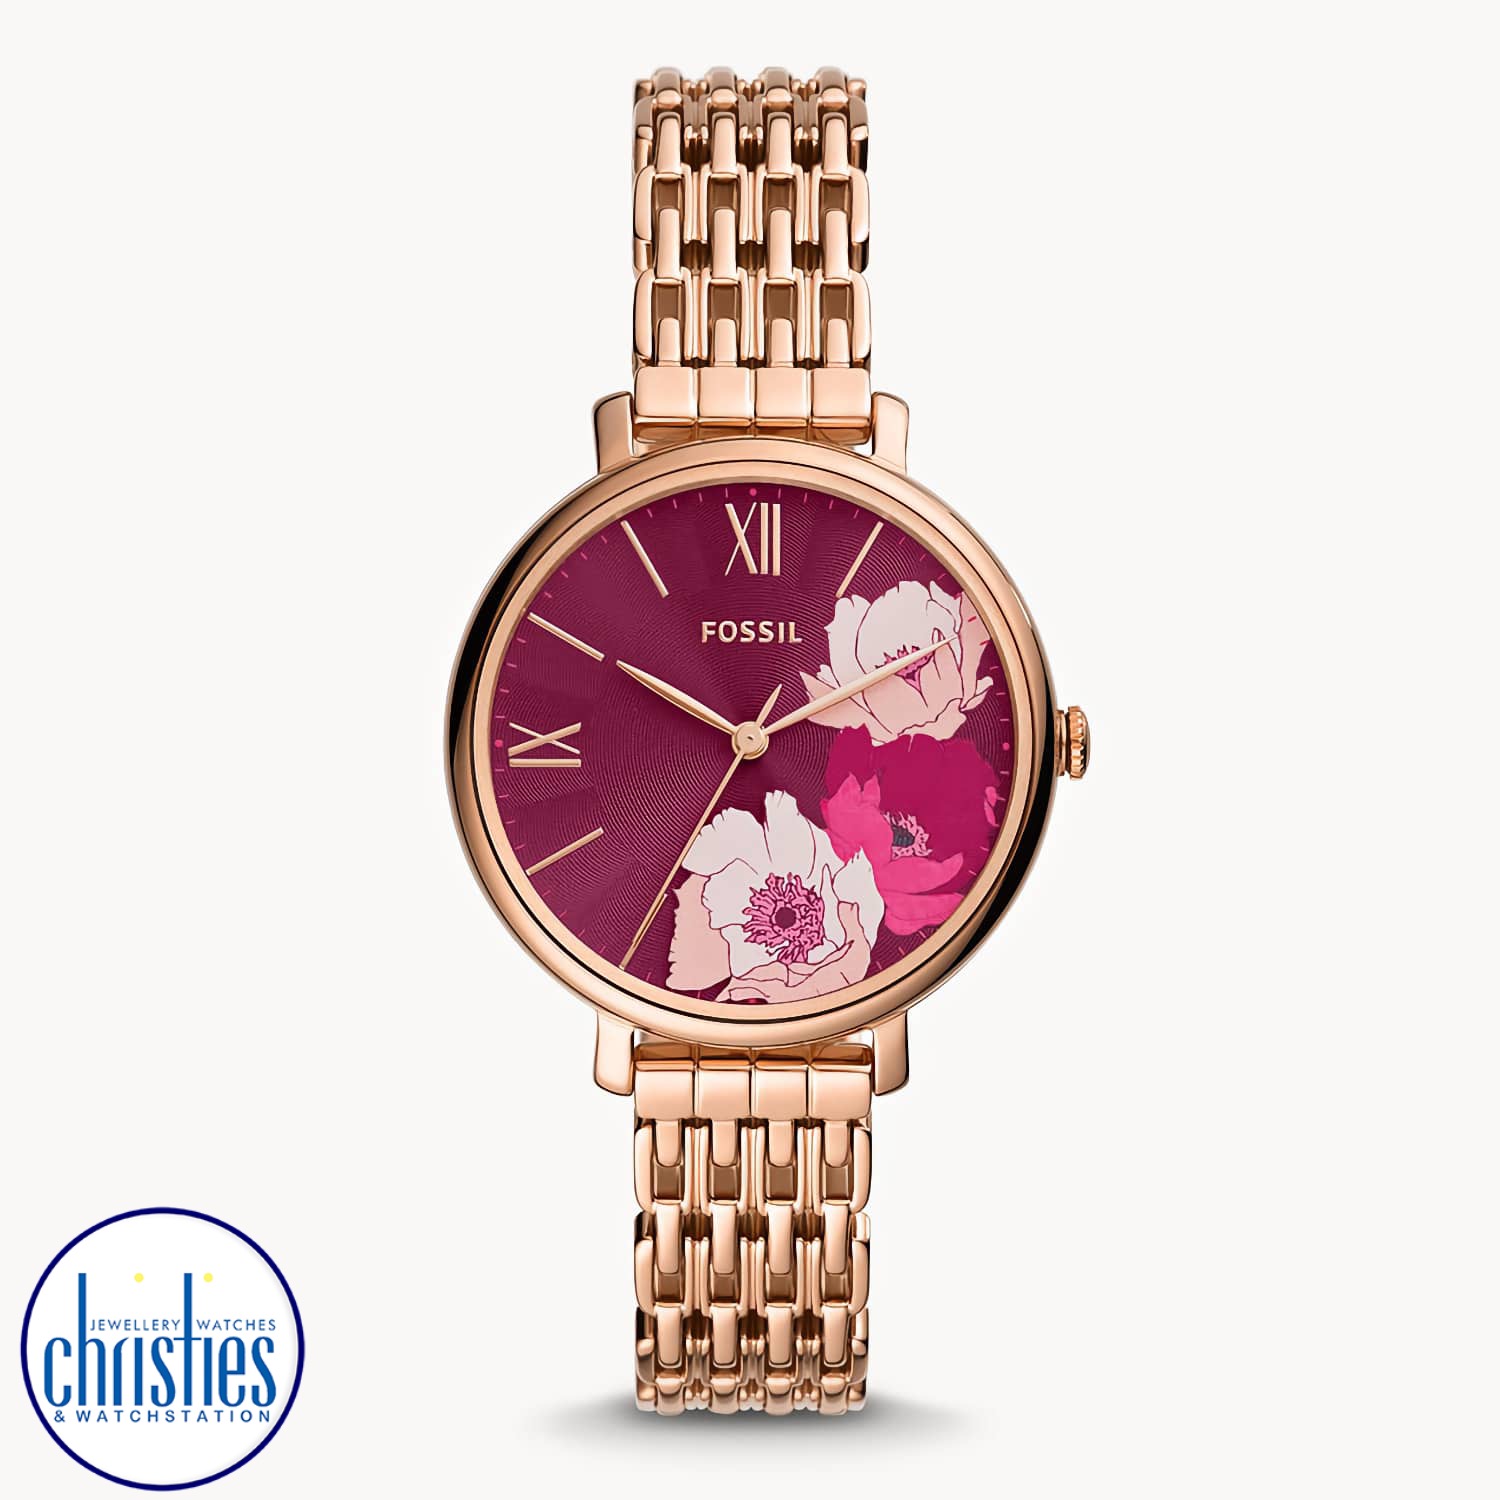 ES5078 Fossil Jacqueline Rose Gold-Tone Stainless Steel Watch. ES5078 Fossil Jacqueline Three-Hand Date Rose Gold-Tone Stainless Steel Watch Afterpay - Split your purchase into 4 instalments - Pay for your purchase over 4 instalments, due every two weeks.